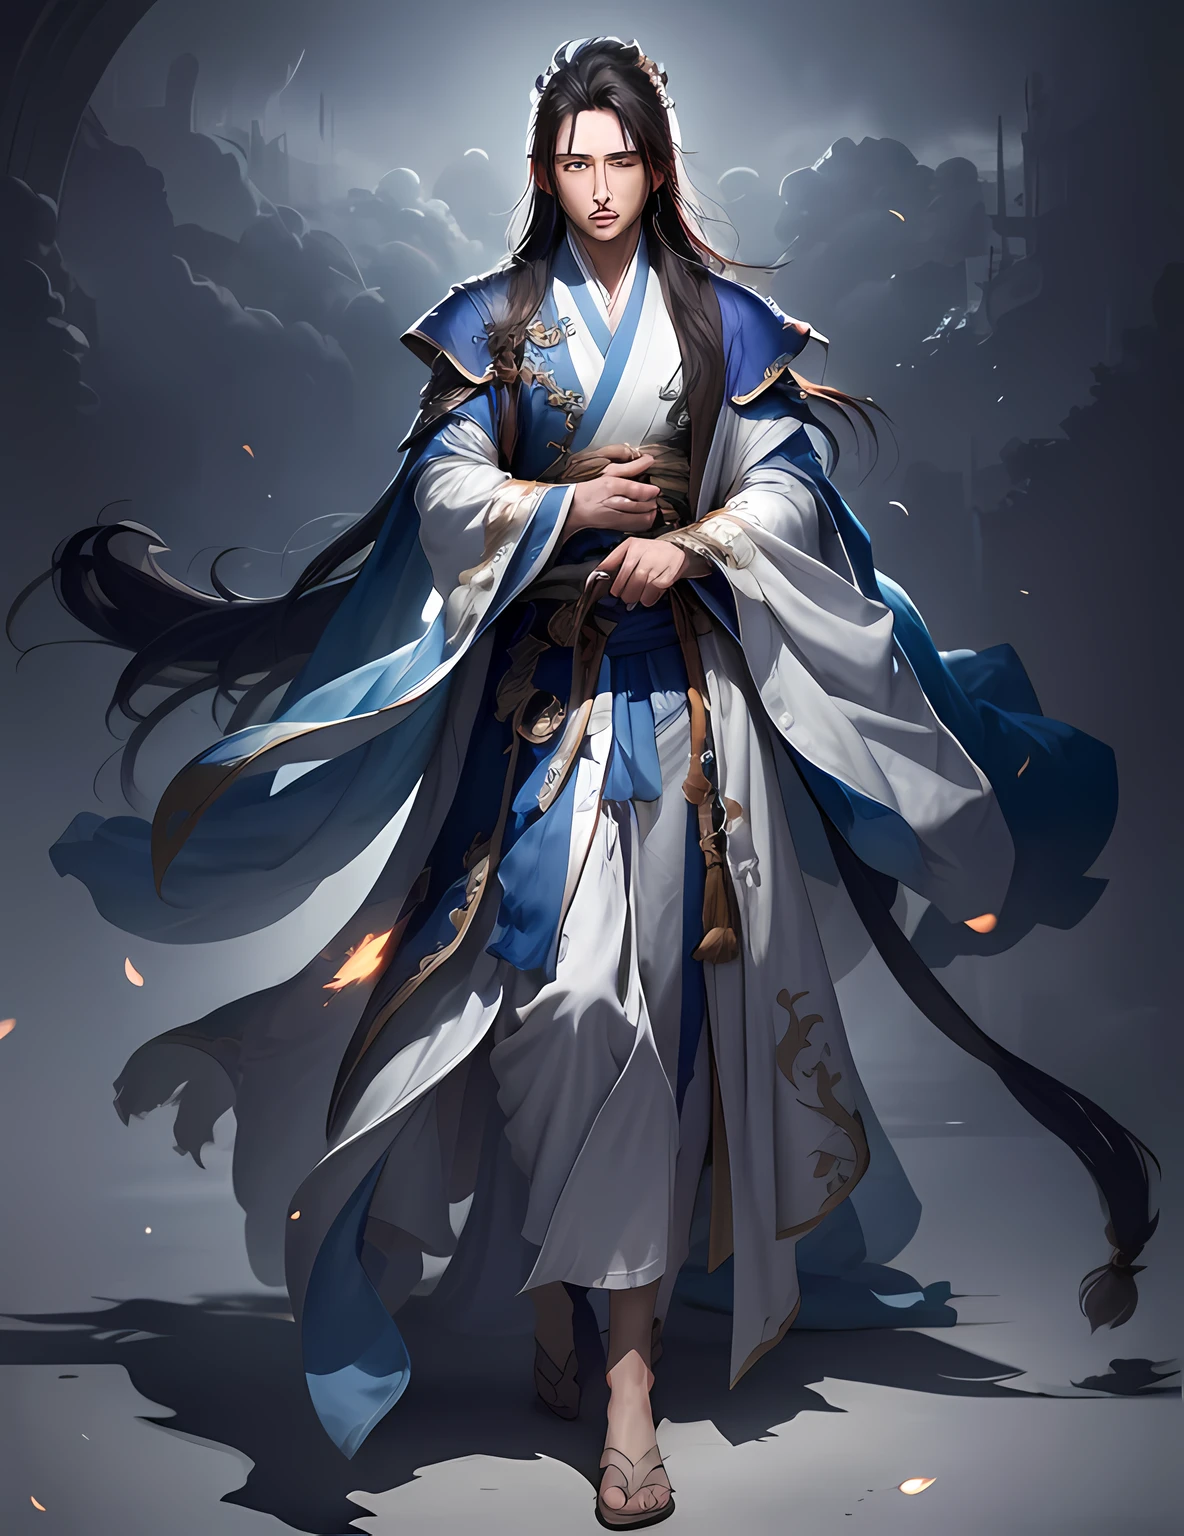 image of a man dressed in a blue and white robe, heise jinyao, full body xianxia, full body wuxia, flowing hair and long robes, picture of a male cleric, wearing flowing robes, inspired by Cao Zhibai, zhao yun, cotton cloud mage robes, inspired by Wu Daozi,hanfu,Blue magic between the palms,heise jinyao, full body xianxia, picture of a male cleric, flowing hair and long robes, zhao yun, skinny male fantasy alchemist, full body wuxia, inspired by Cao Zhibai, wearing flowing robes, cotton cloud mage robes, skinny male mage,best shadow, sharp focus, masterpiece, (very detailed CG unified 8k wallpaper),realistic,(hanfu),(((Character face))),